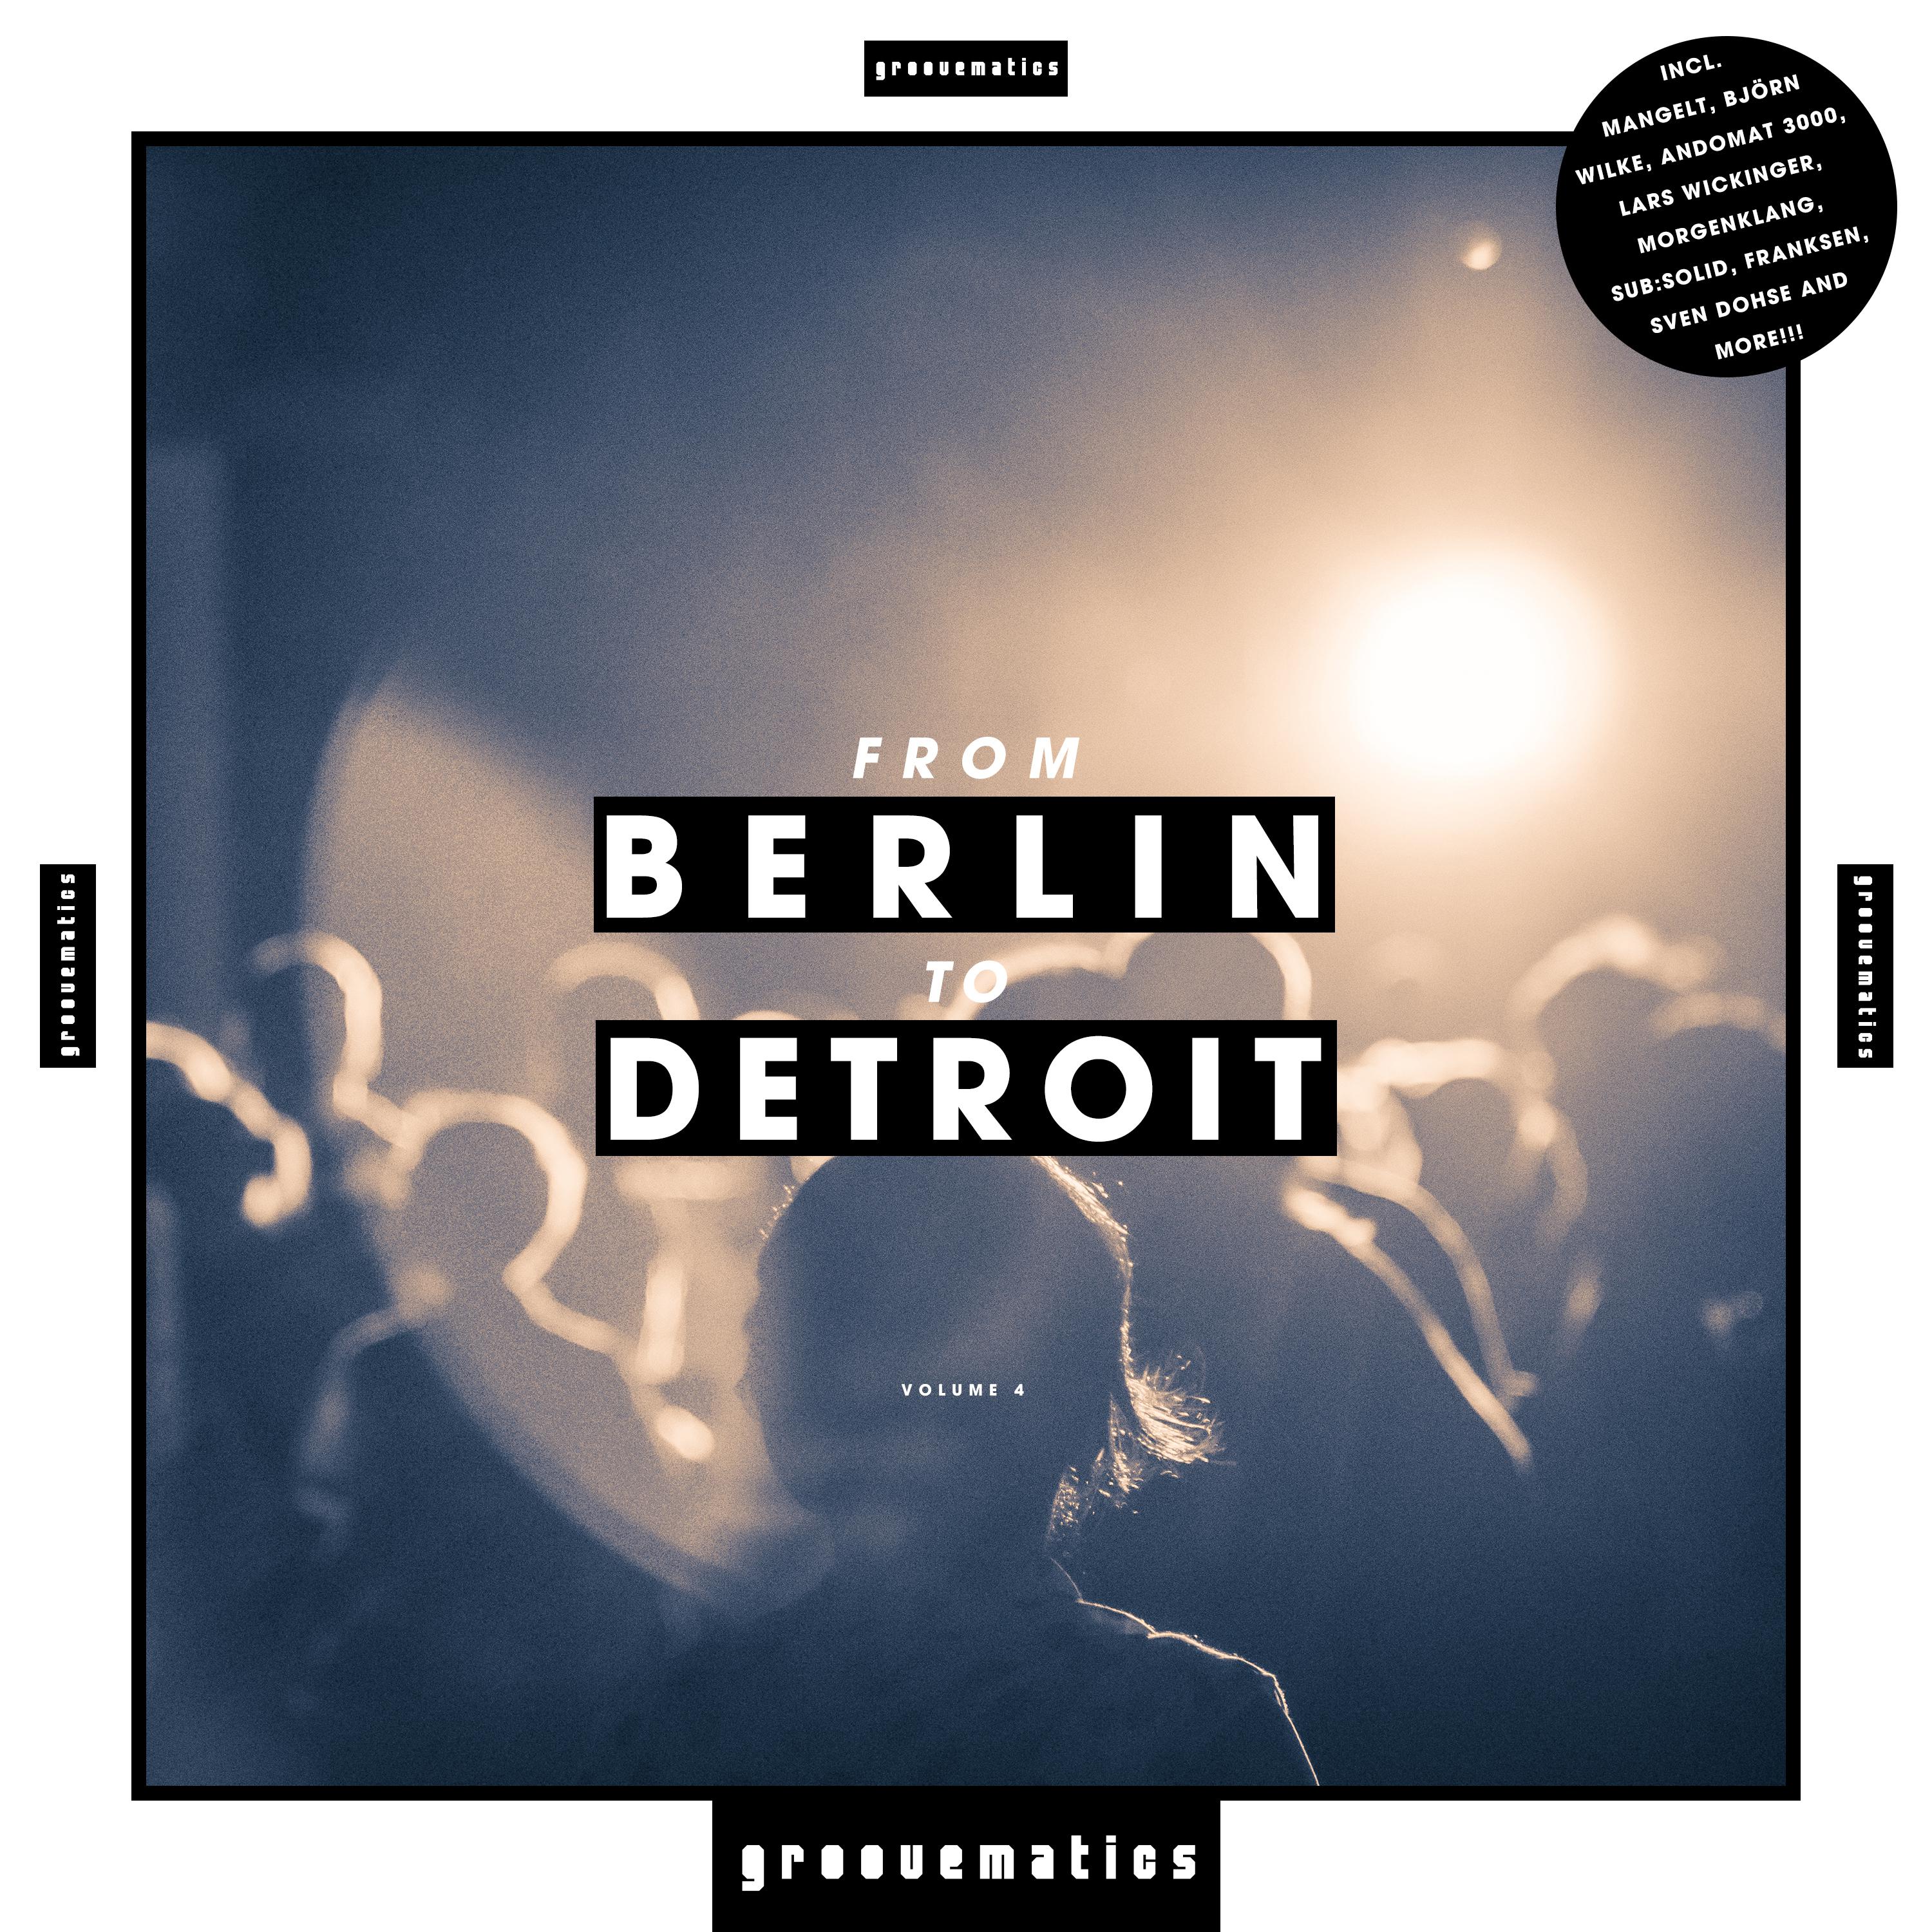 From Berlin to Detroit, Vol. 4